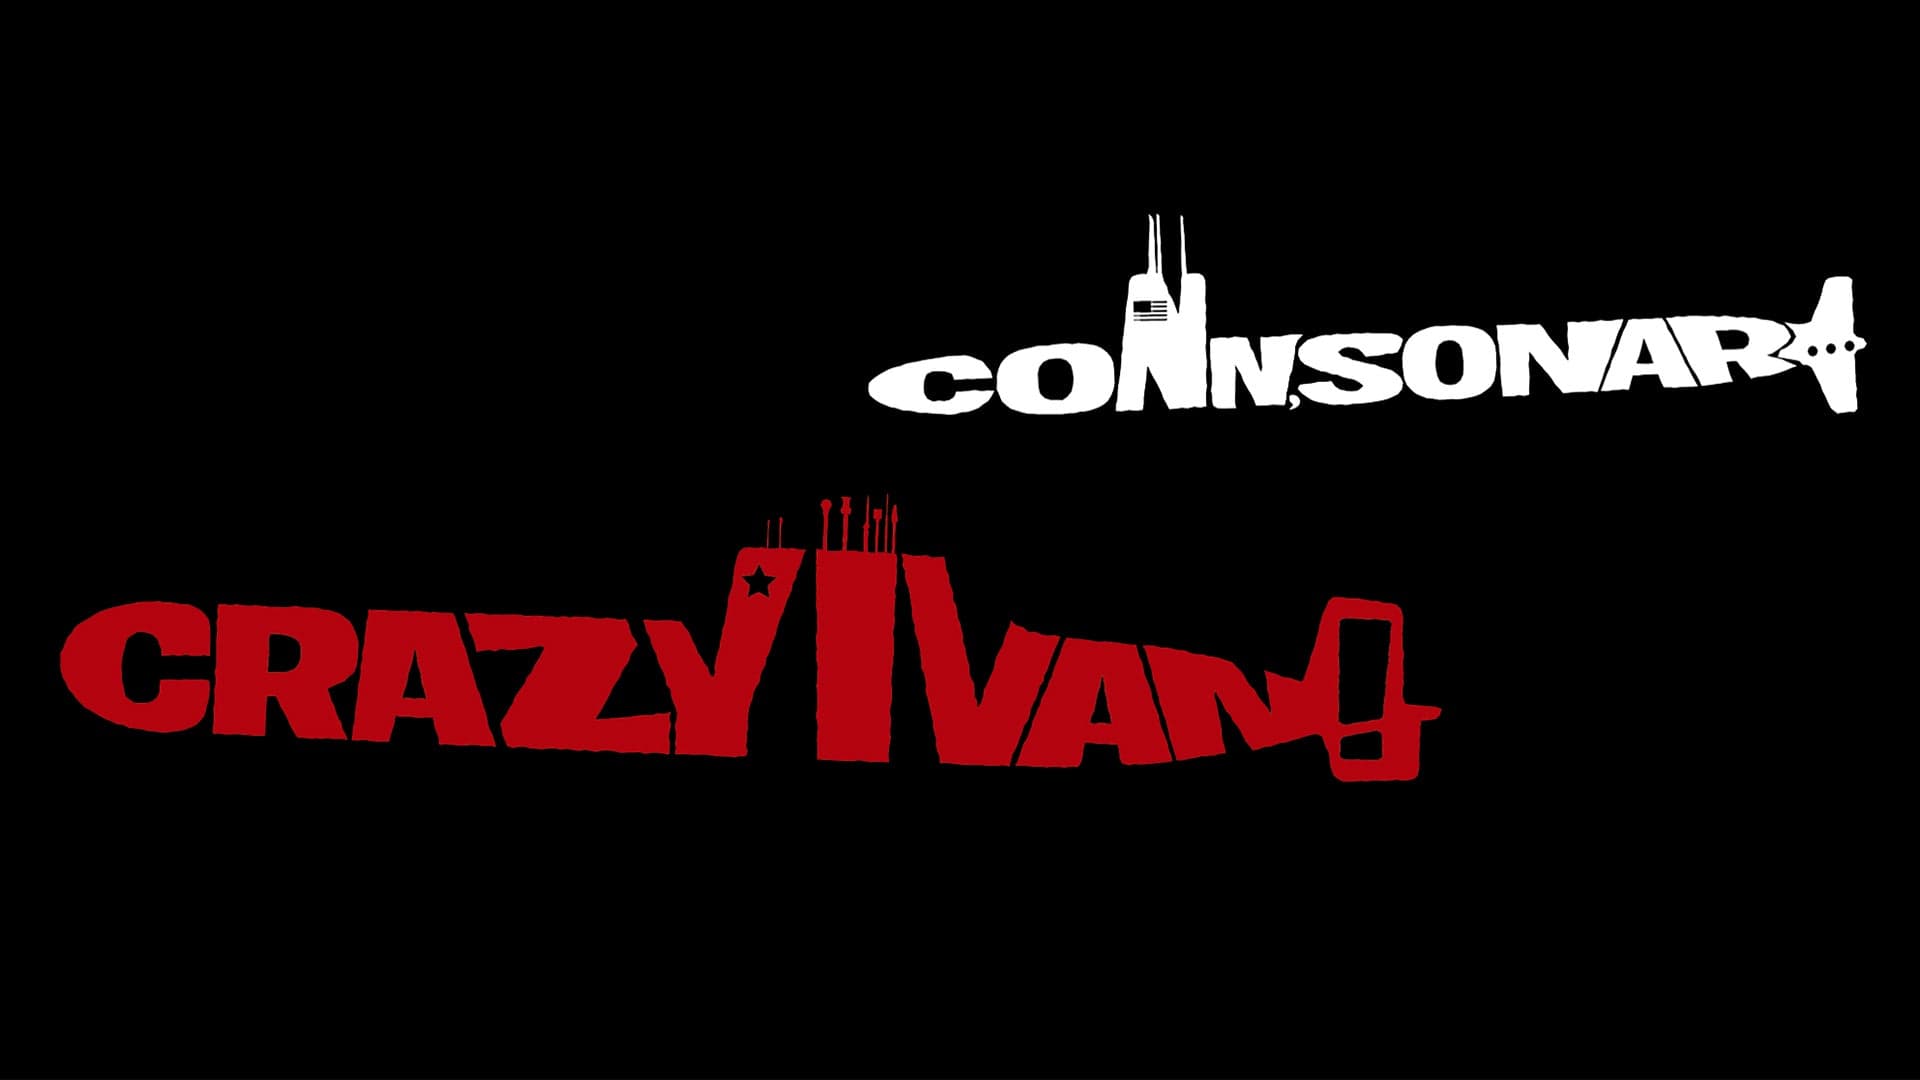 Your Hunt For Red October Has Ended With This ‘Crazy Ivan’ T-Shirt!